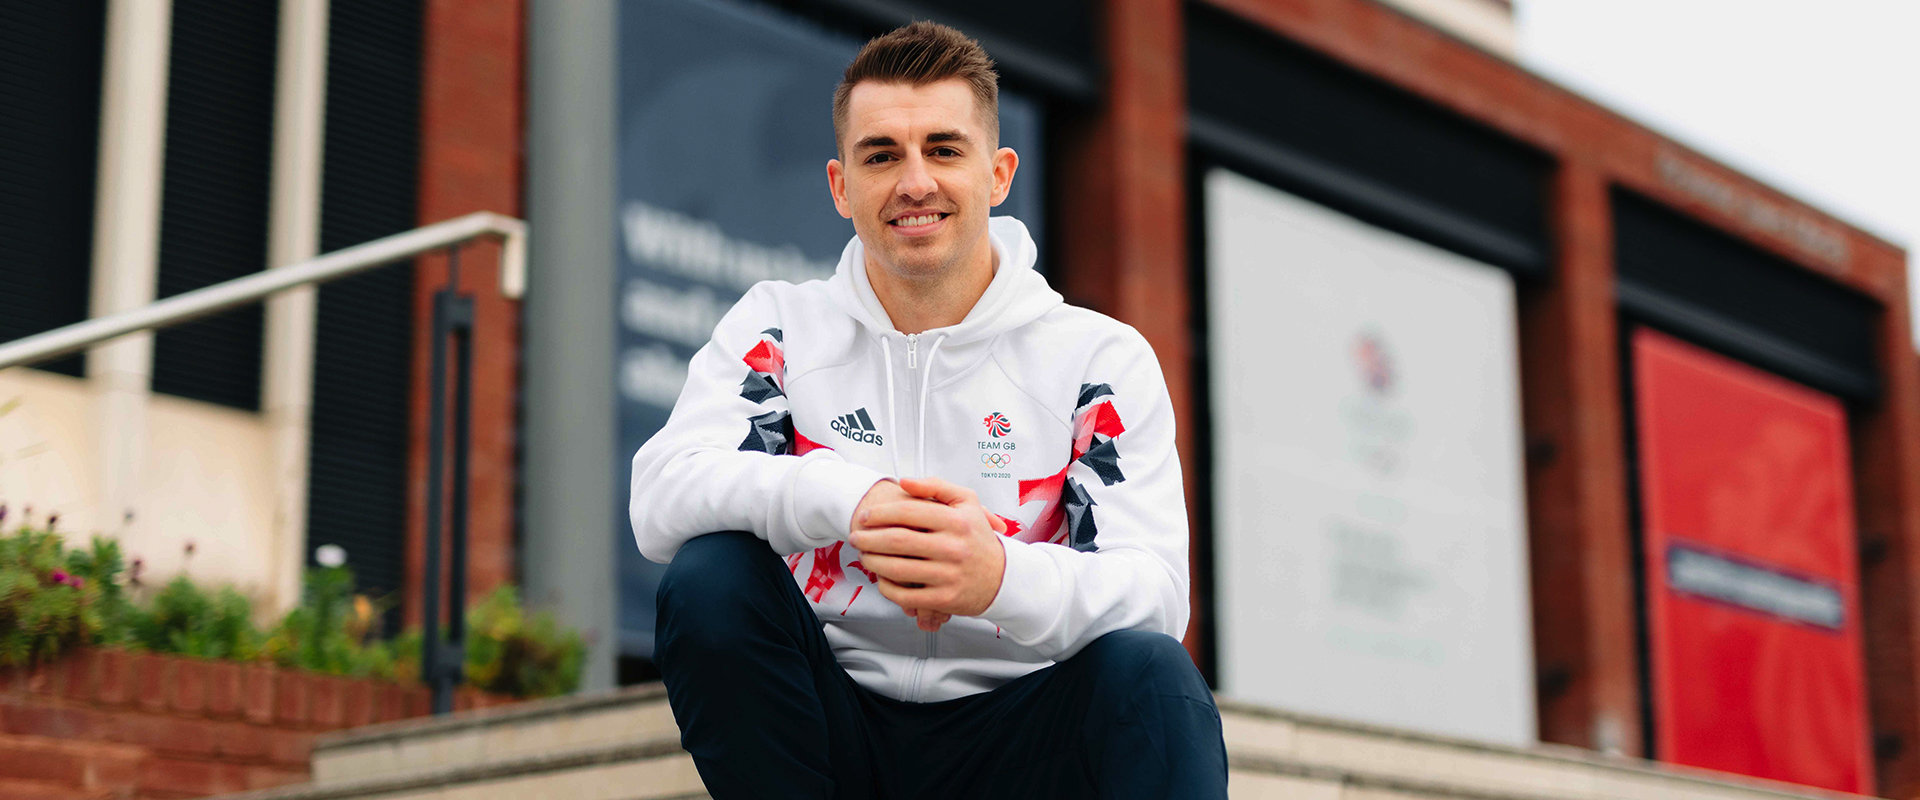 max whitlock sat infront of the university library stairs